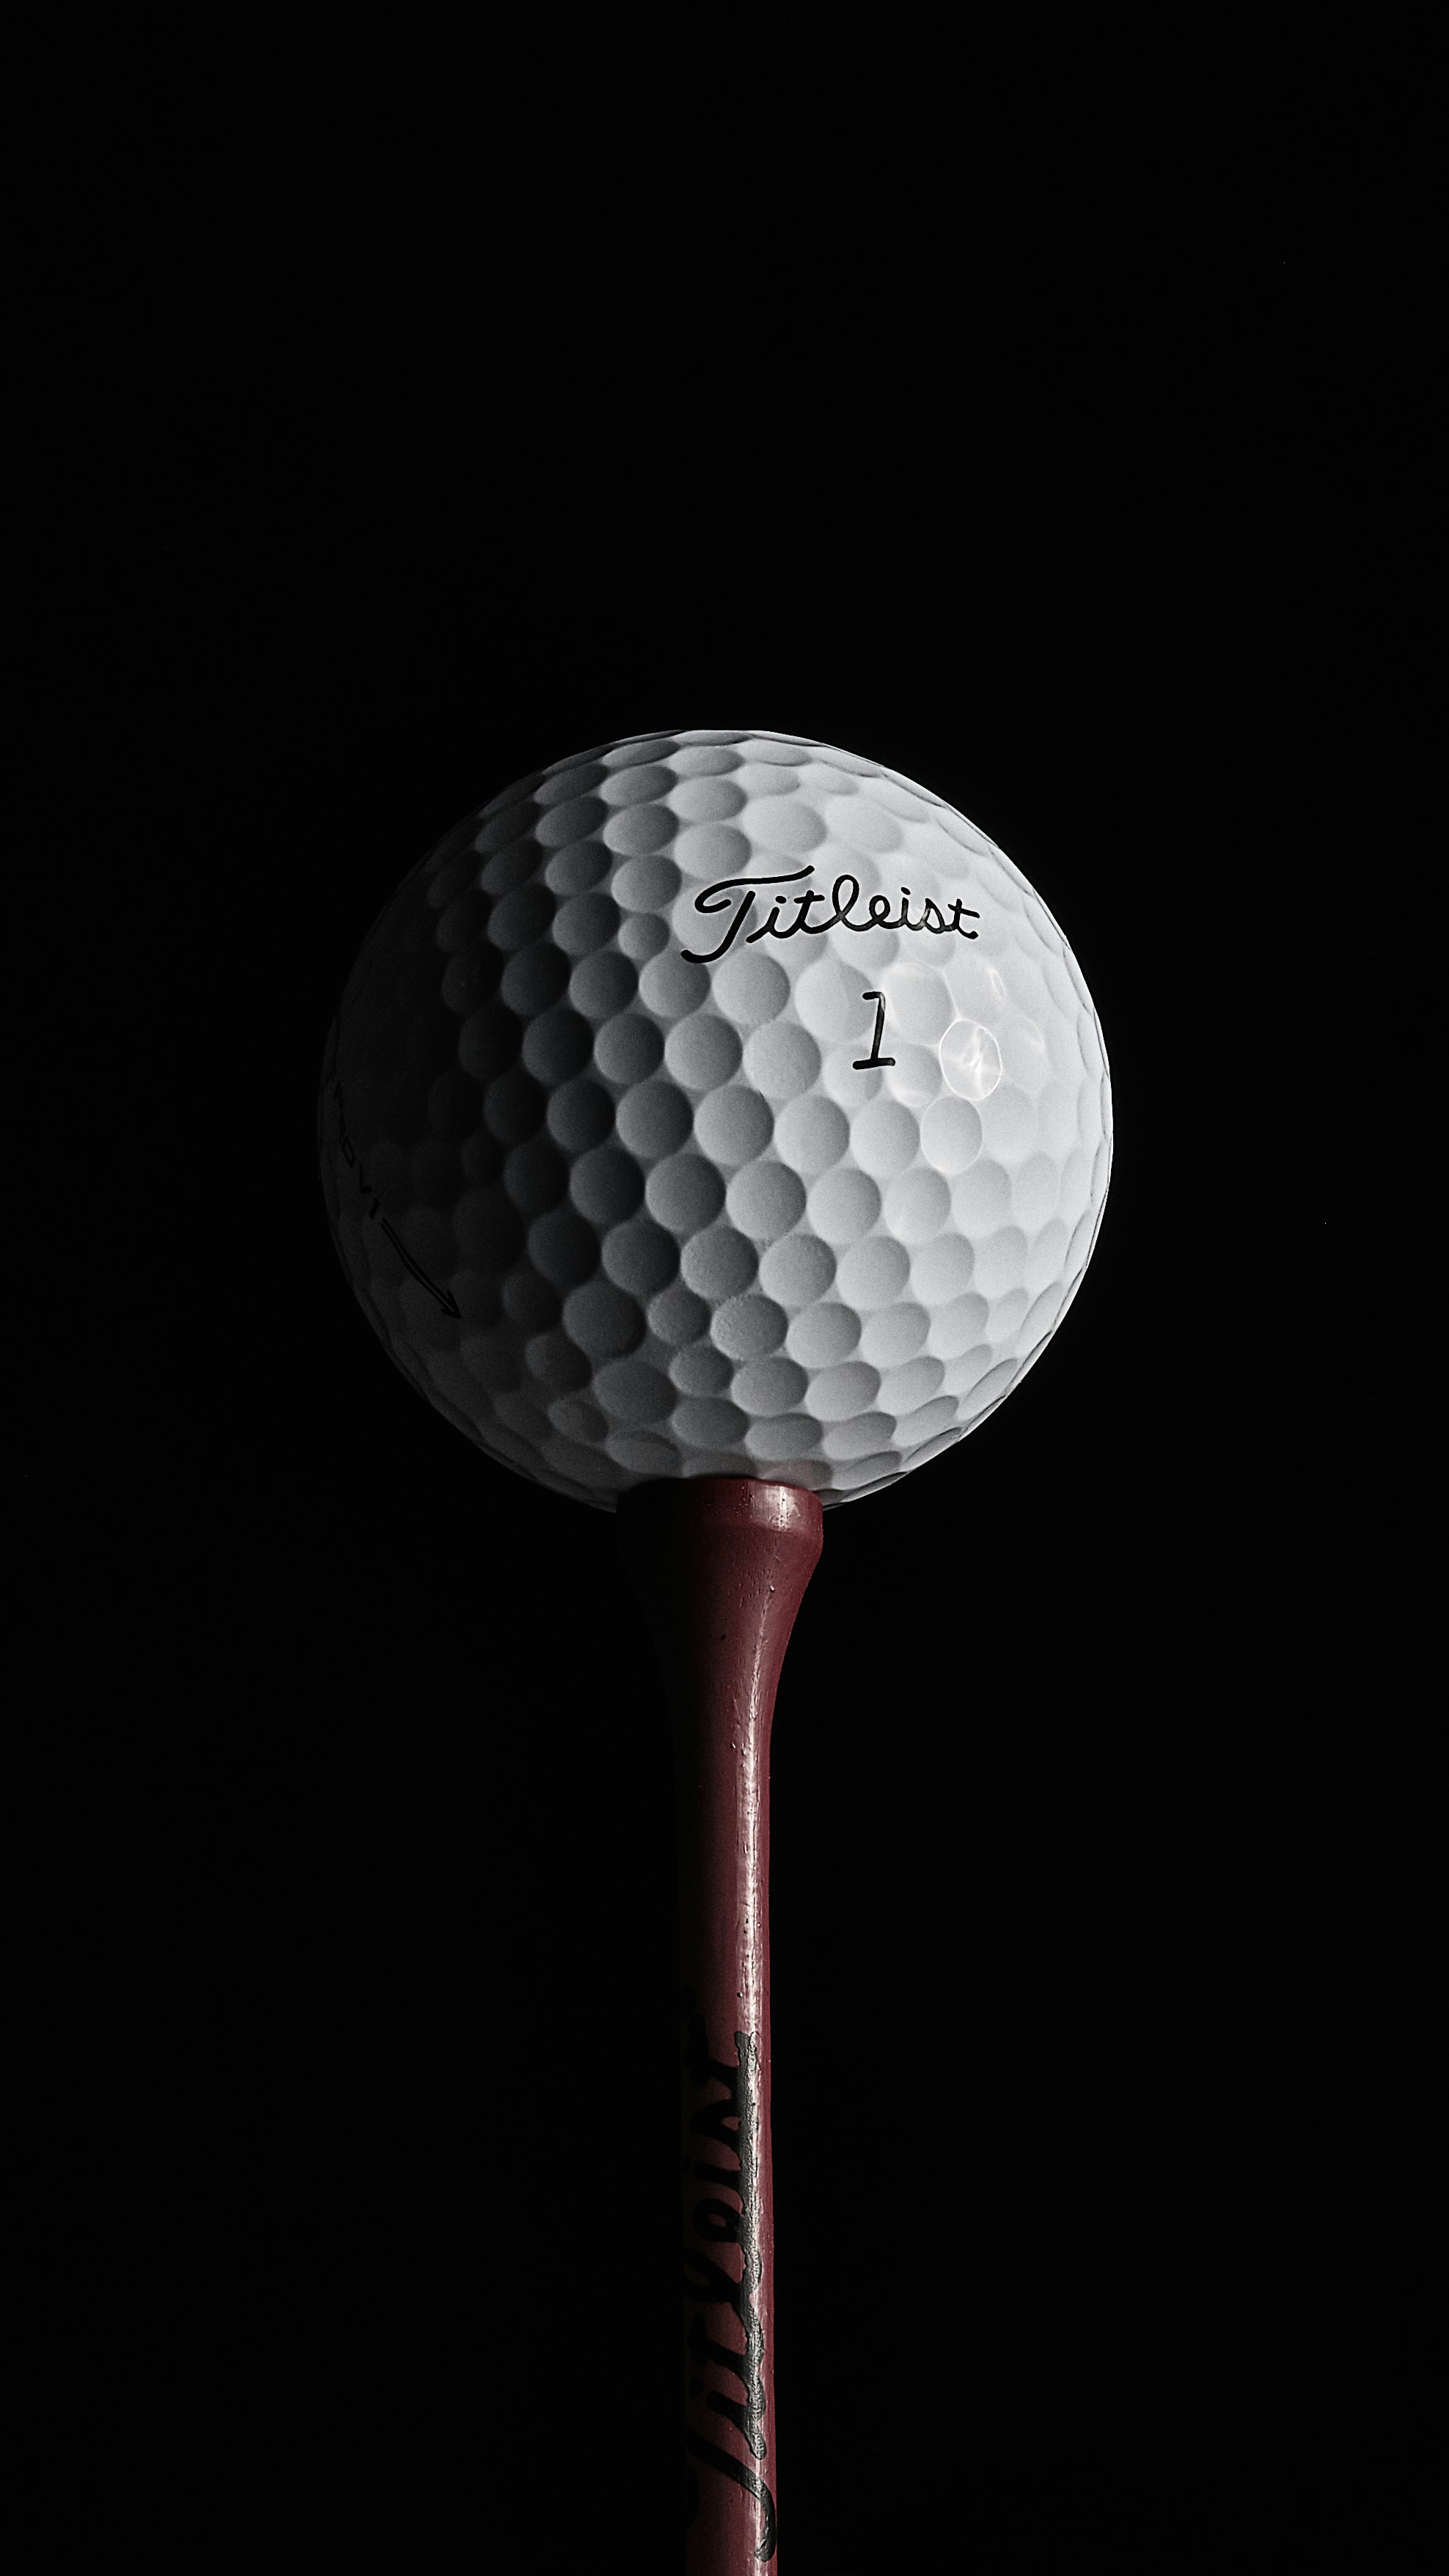 Titleist - What is Considered the best golf ball